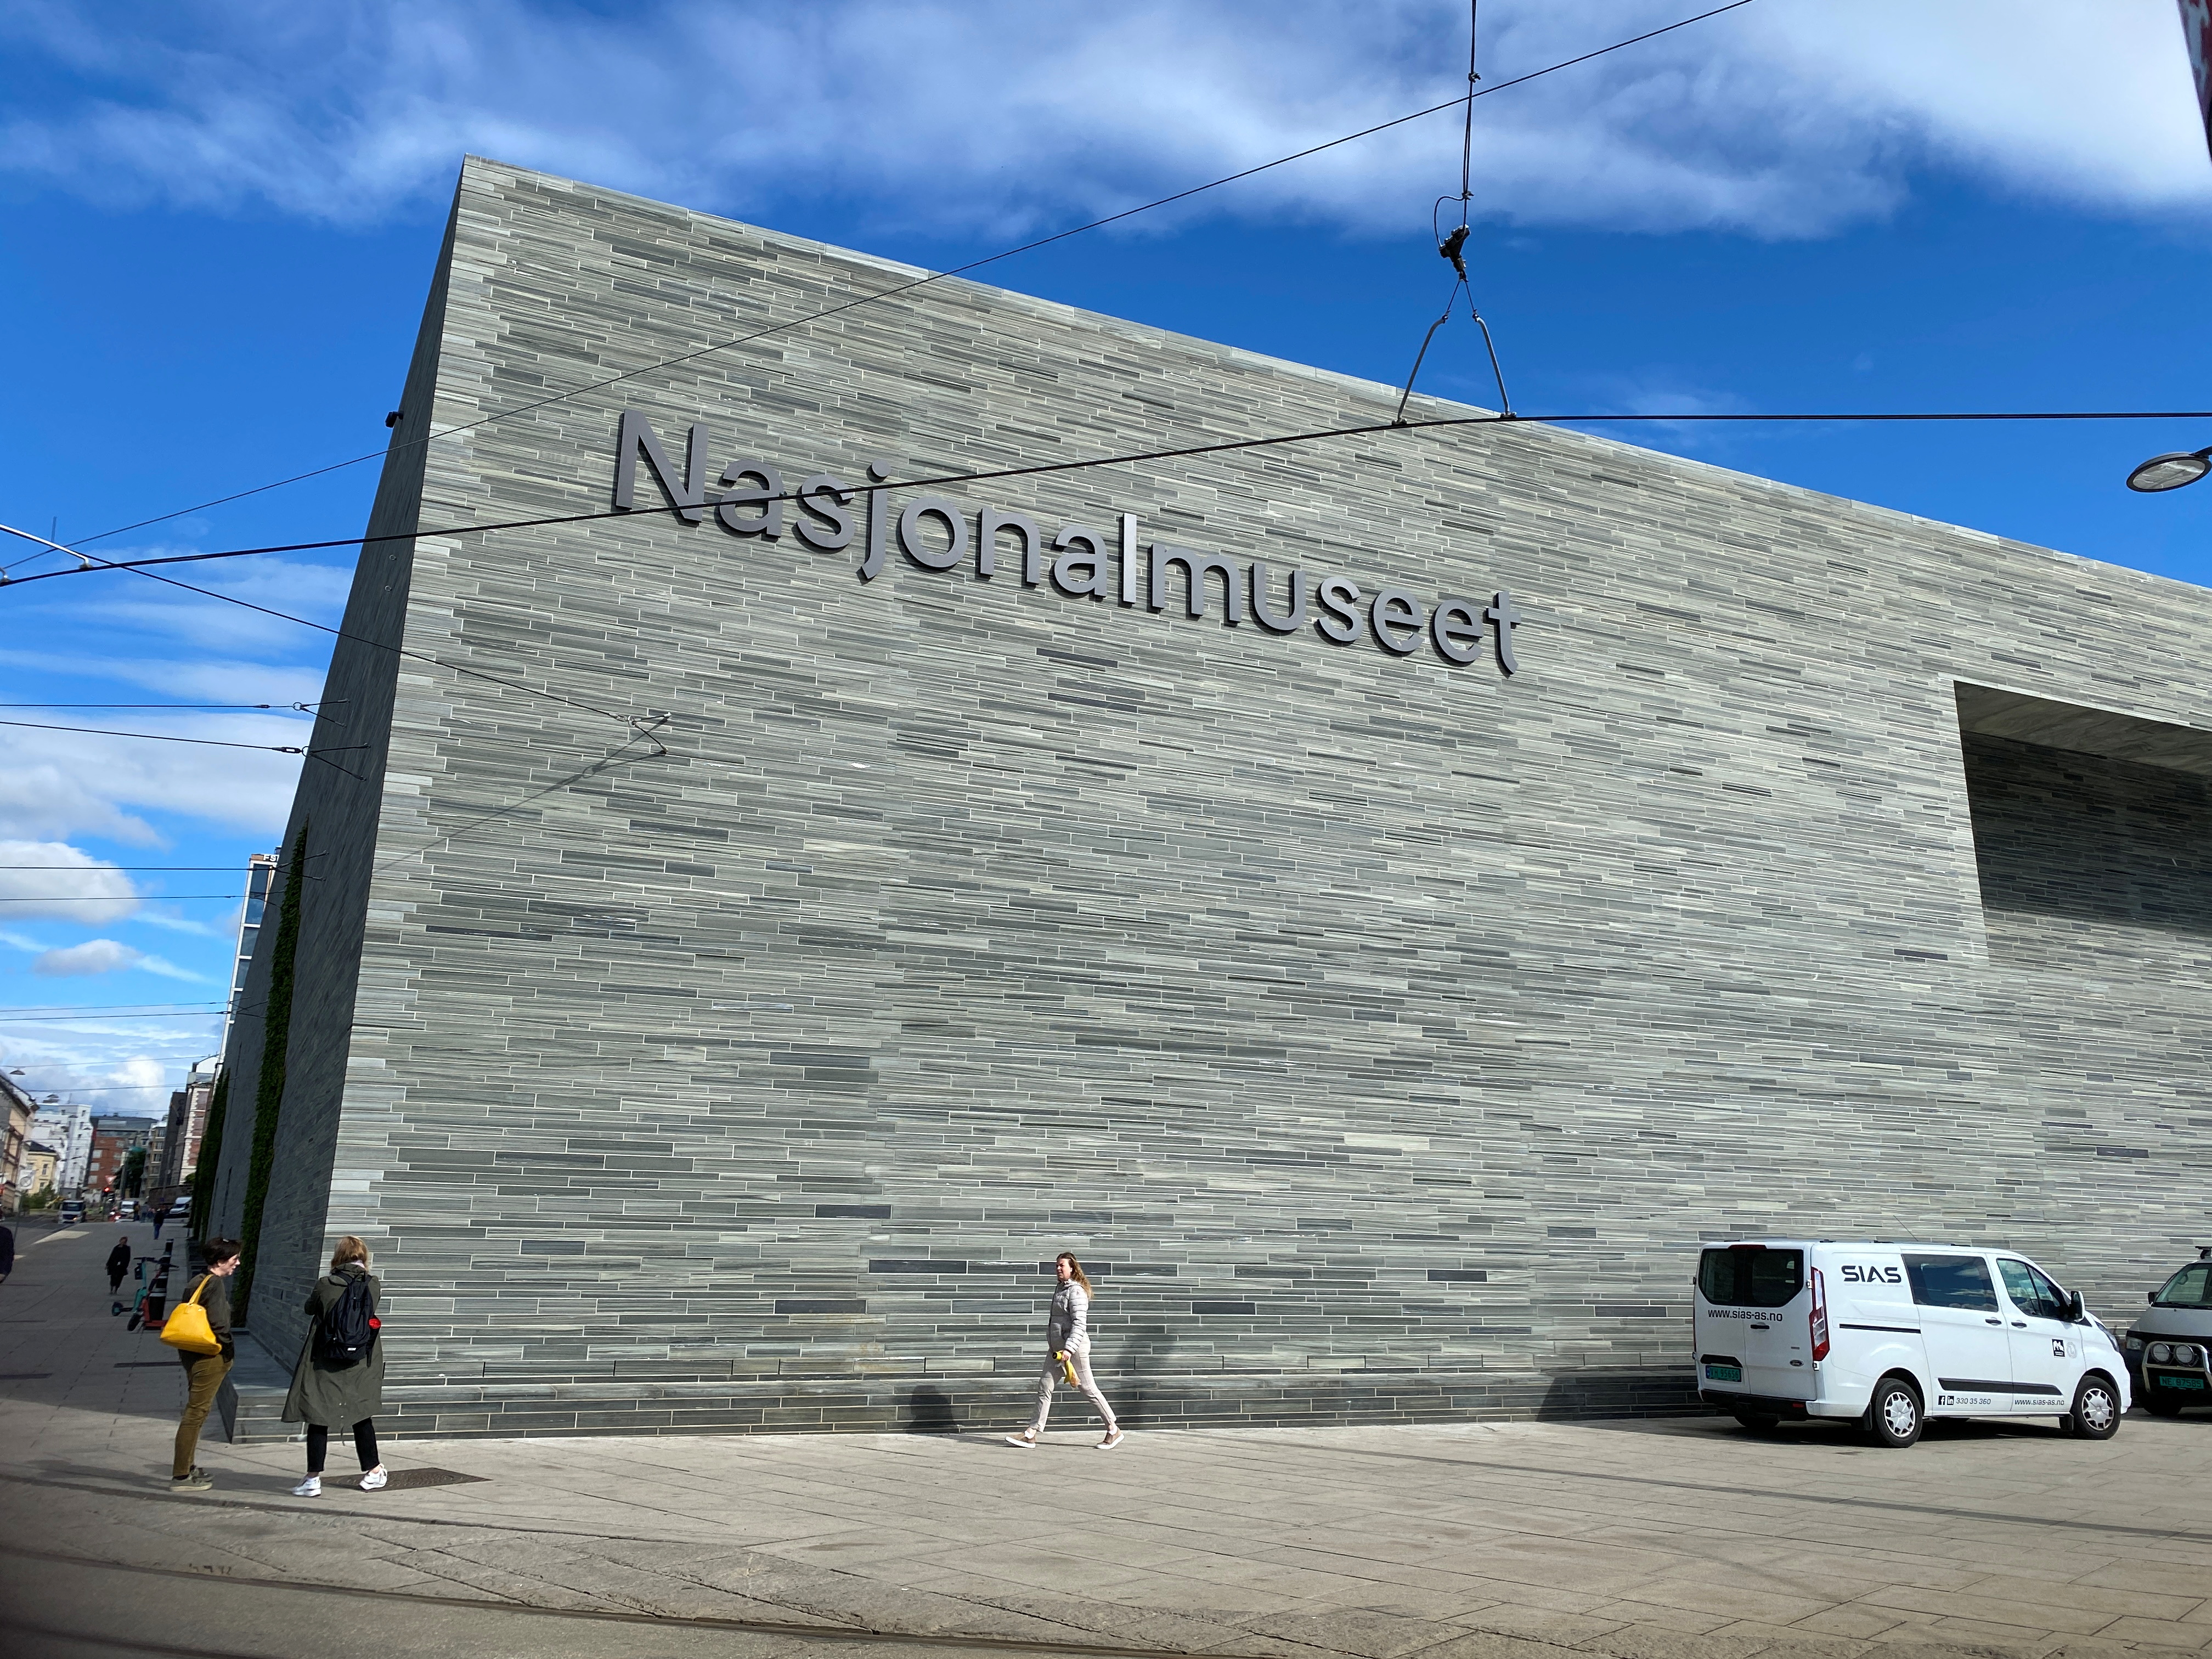 Norway opens new $650 million national art museum complex in Oslo